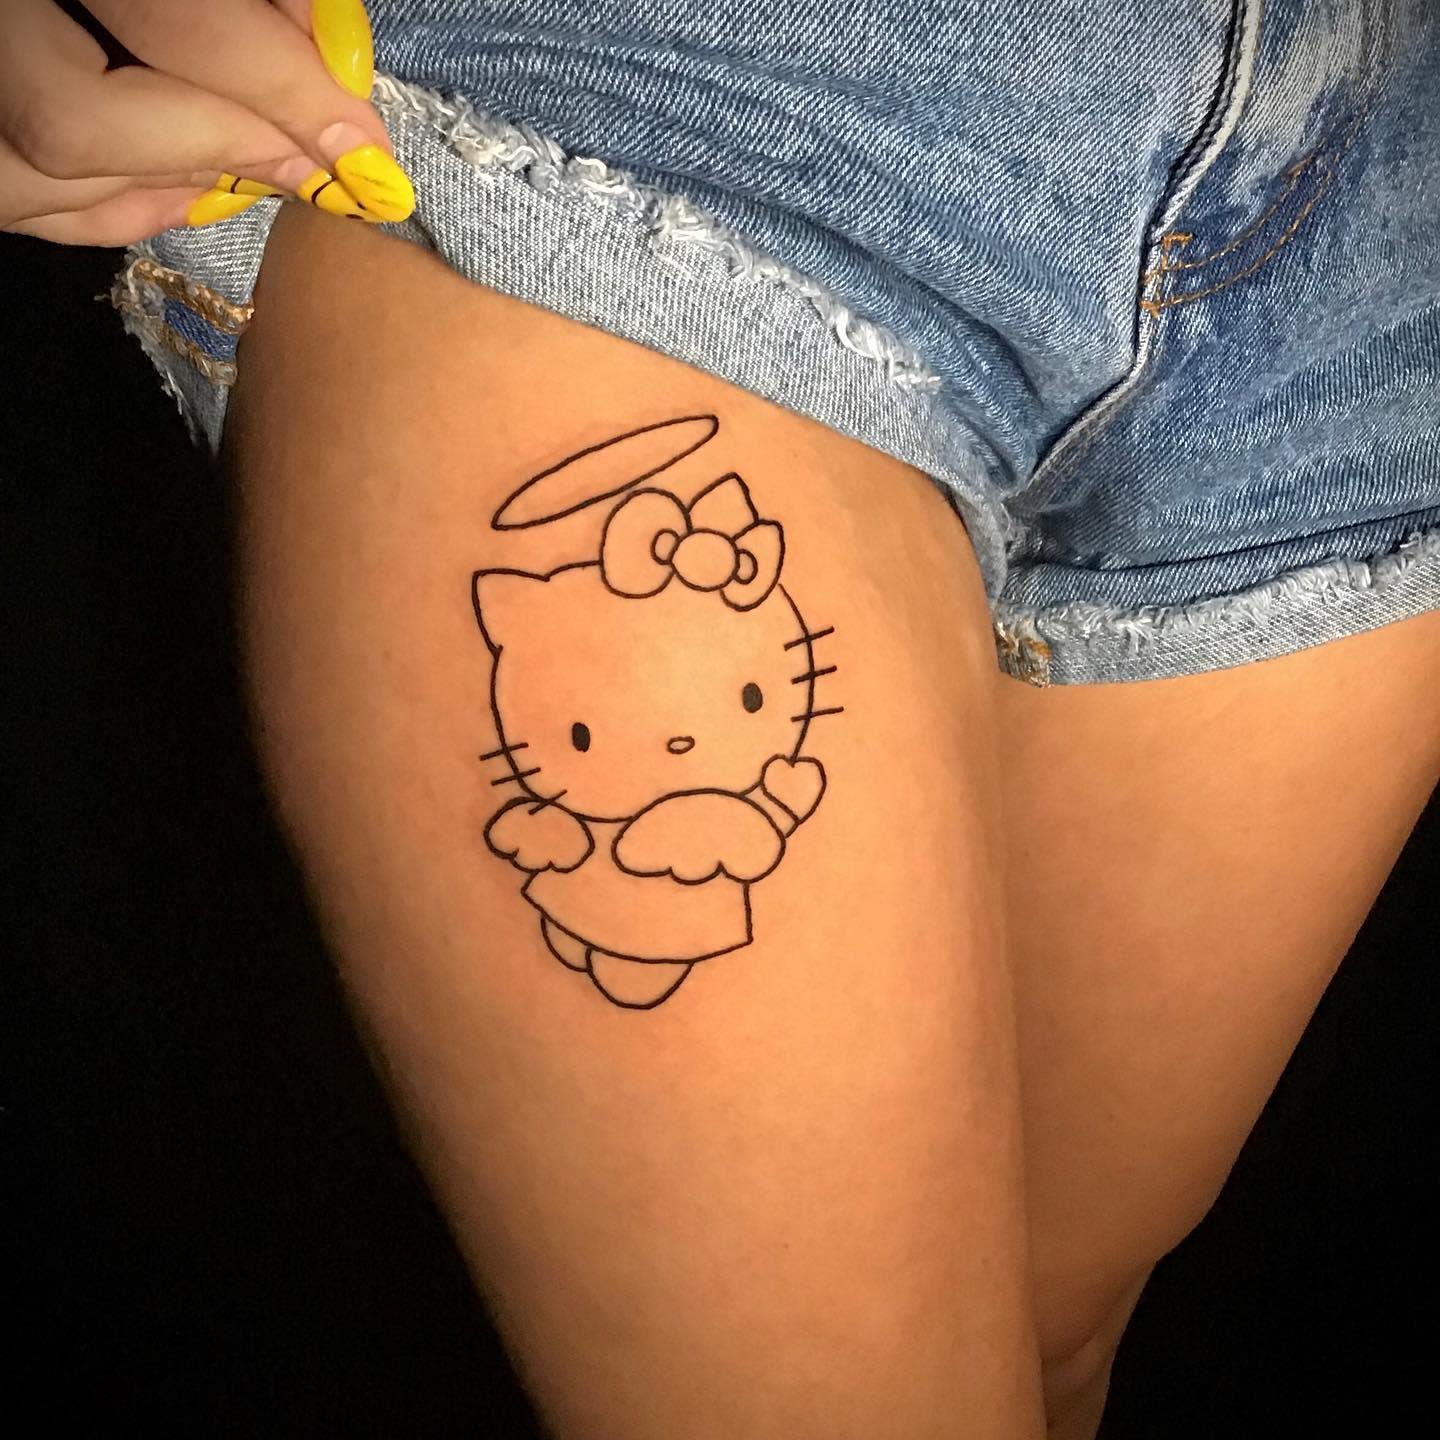 my new hello kitty tattoo done by alicia thomas at visible ink in malden  ma  rtattoos